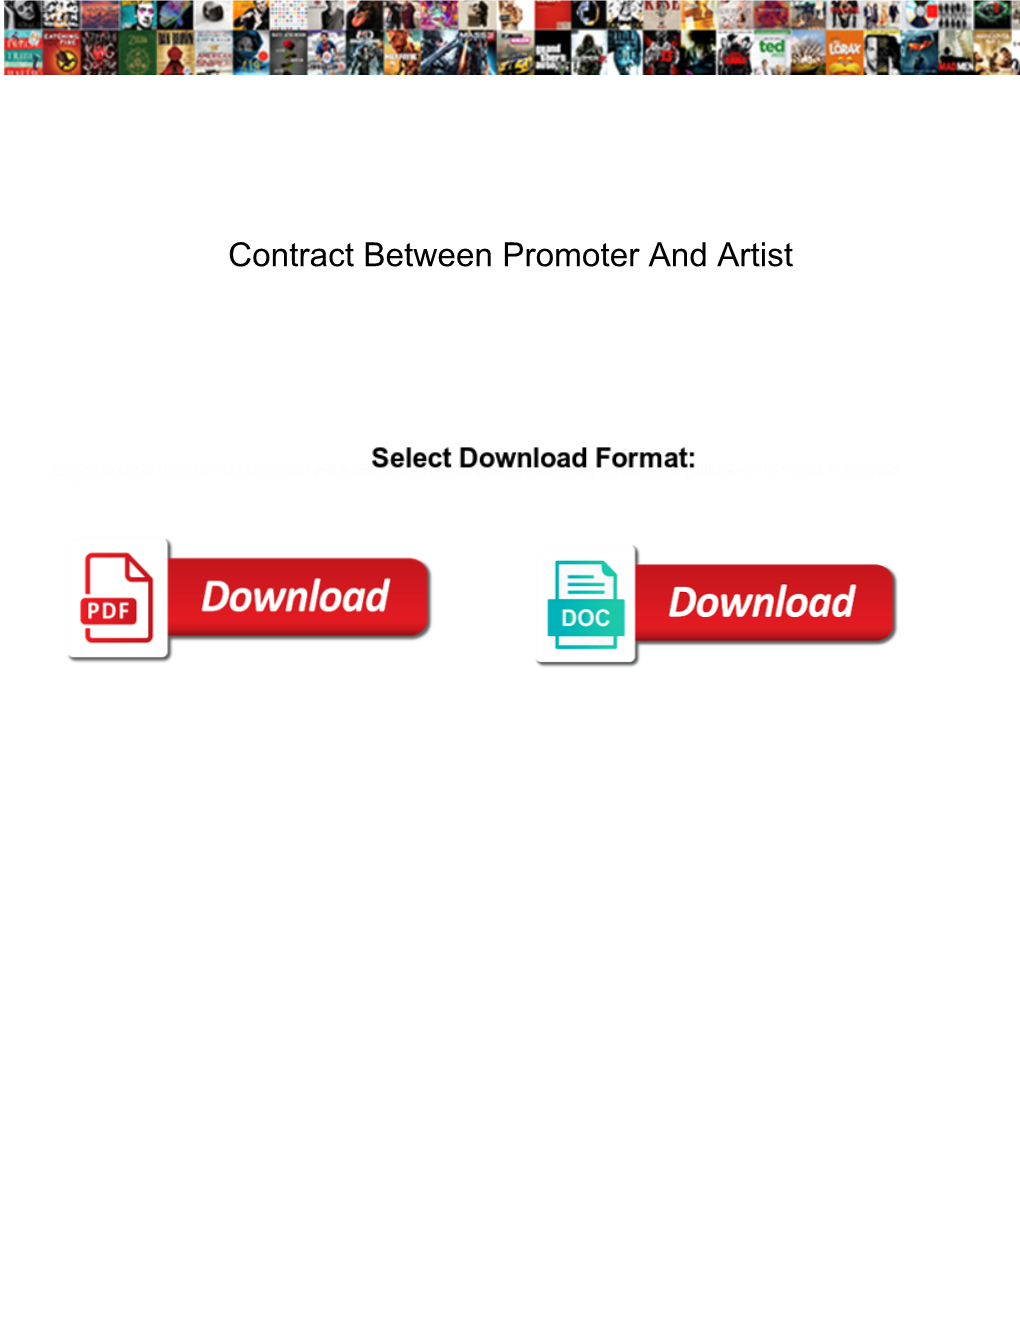 Contract Between Promoter and Artist